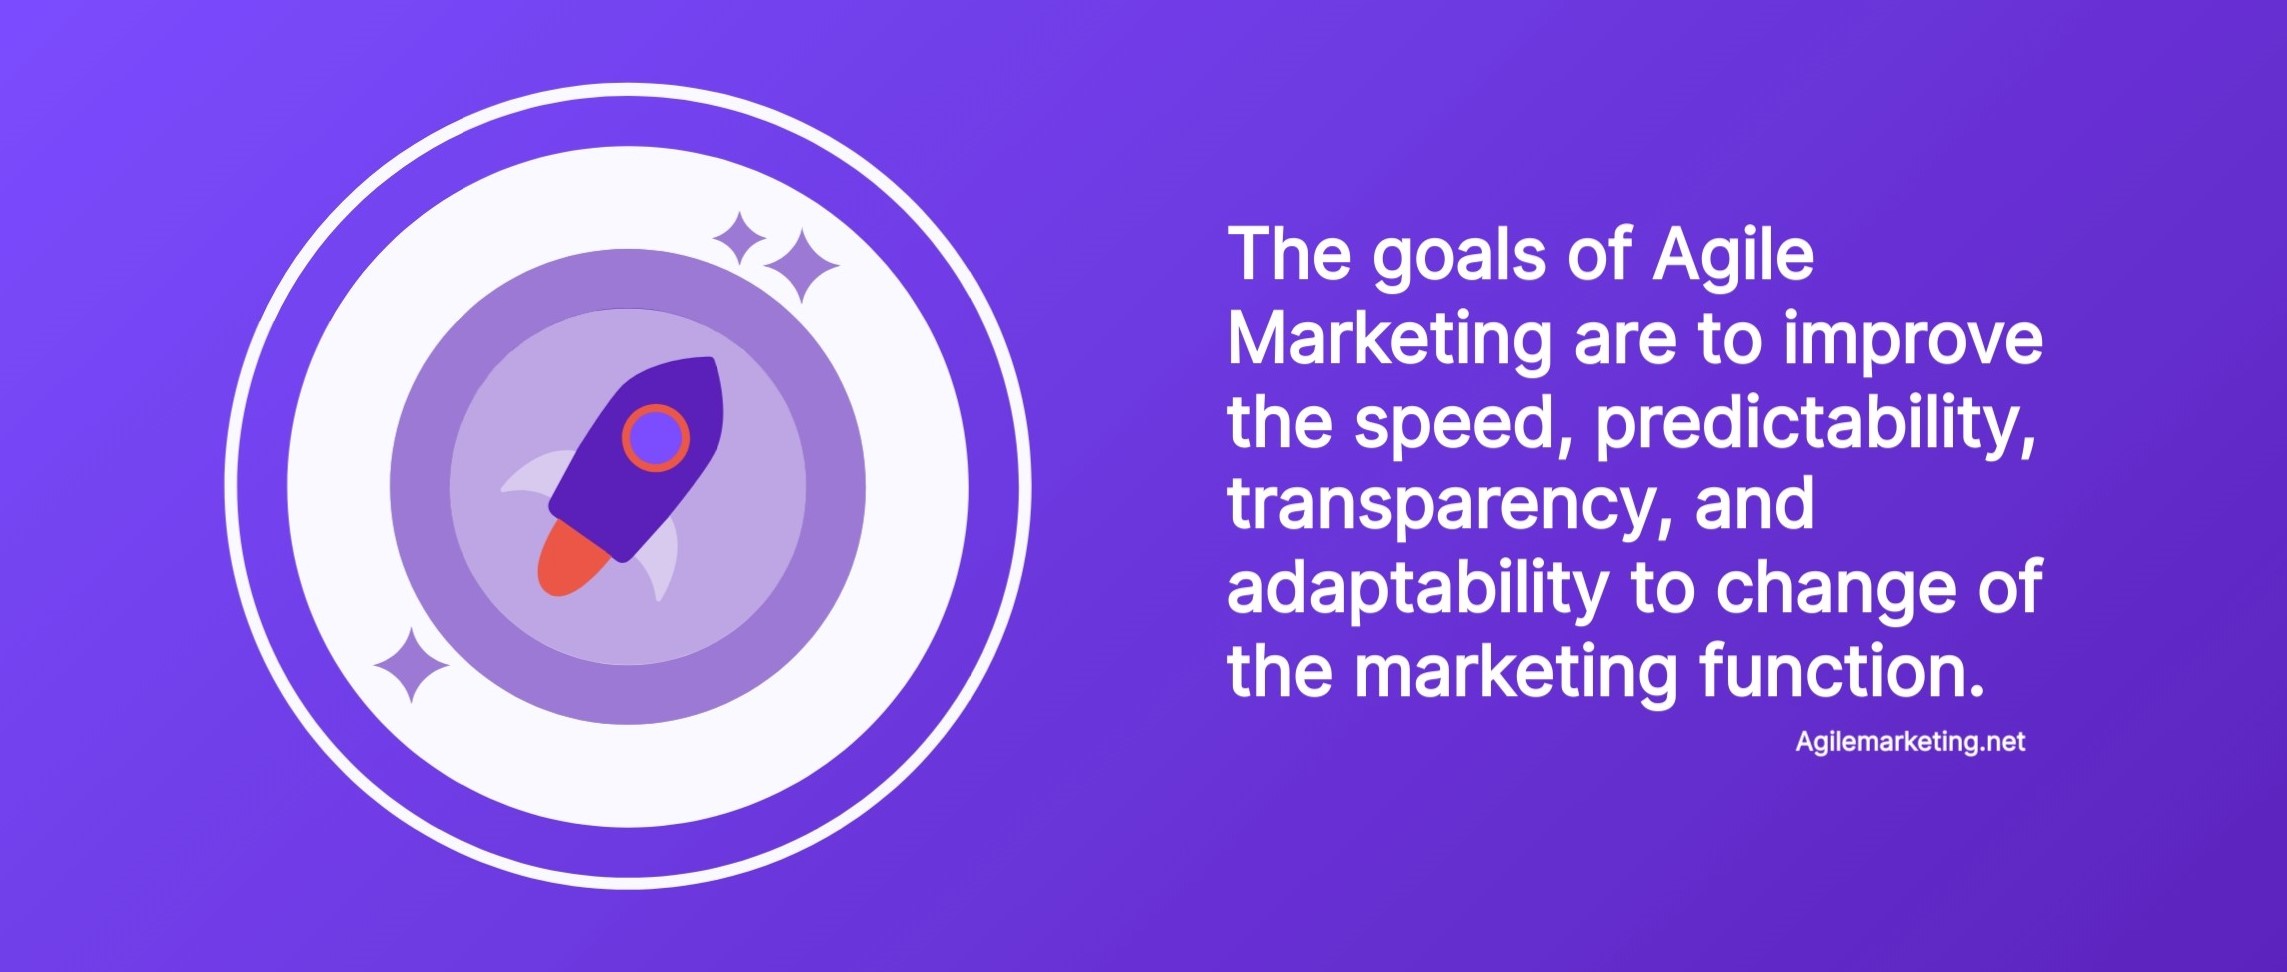 Graphic  with quote from Agilemarketing.net: The goals of Agile marketing are to improve the speed, predictability, transparency, and adaptability to change of the marketing function.